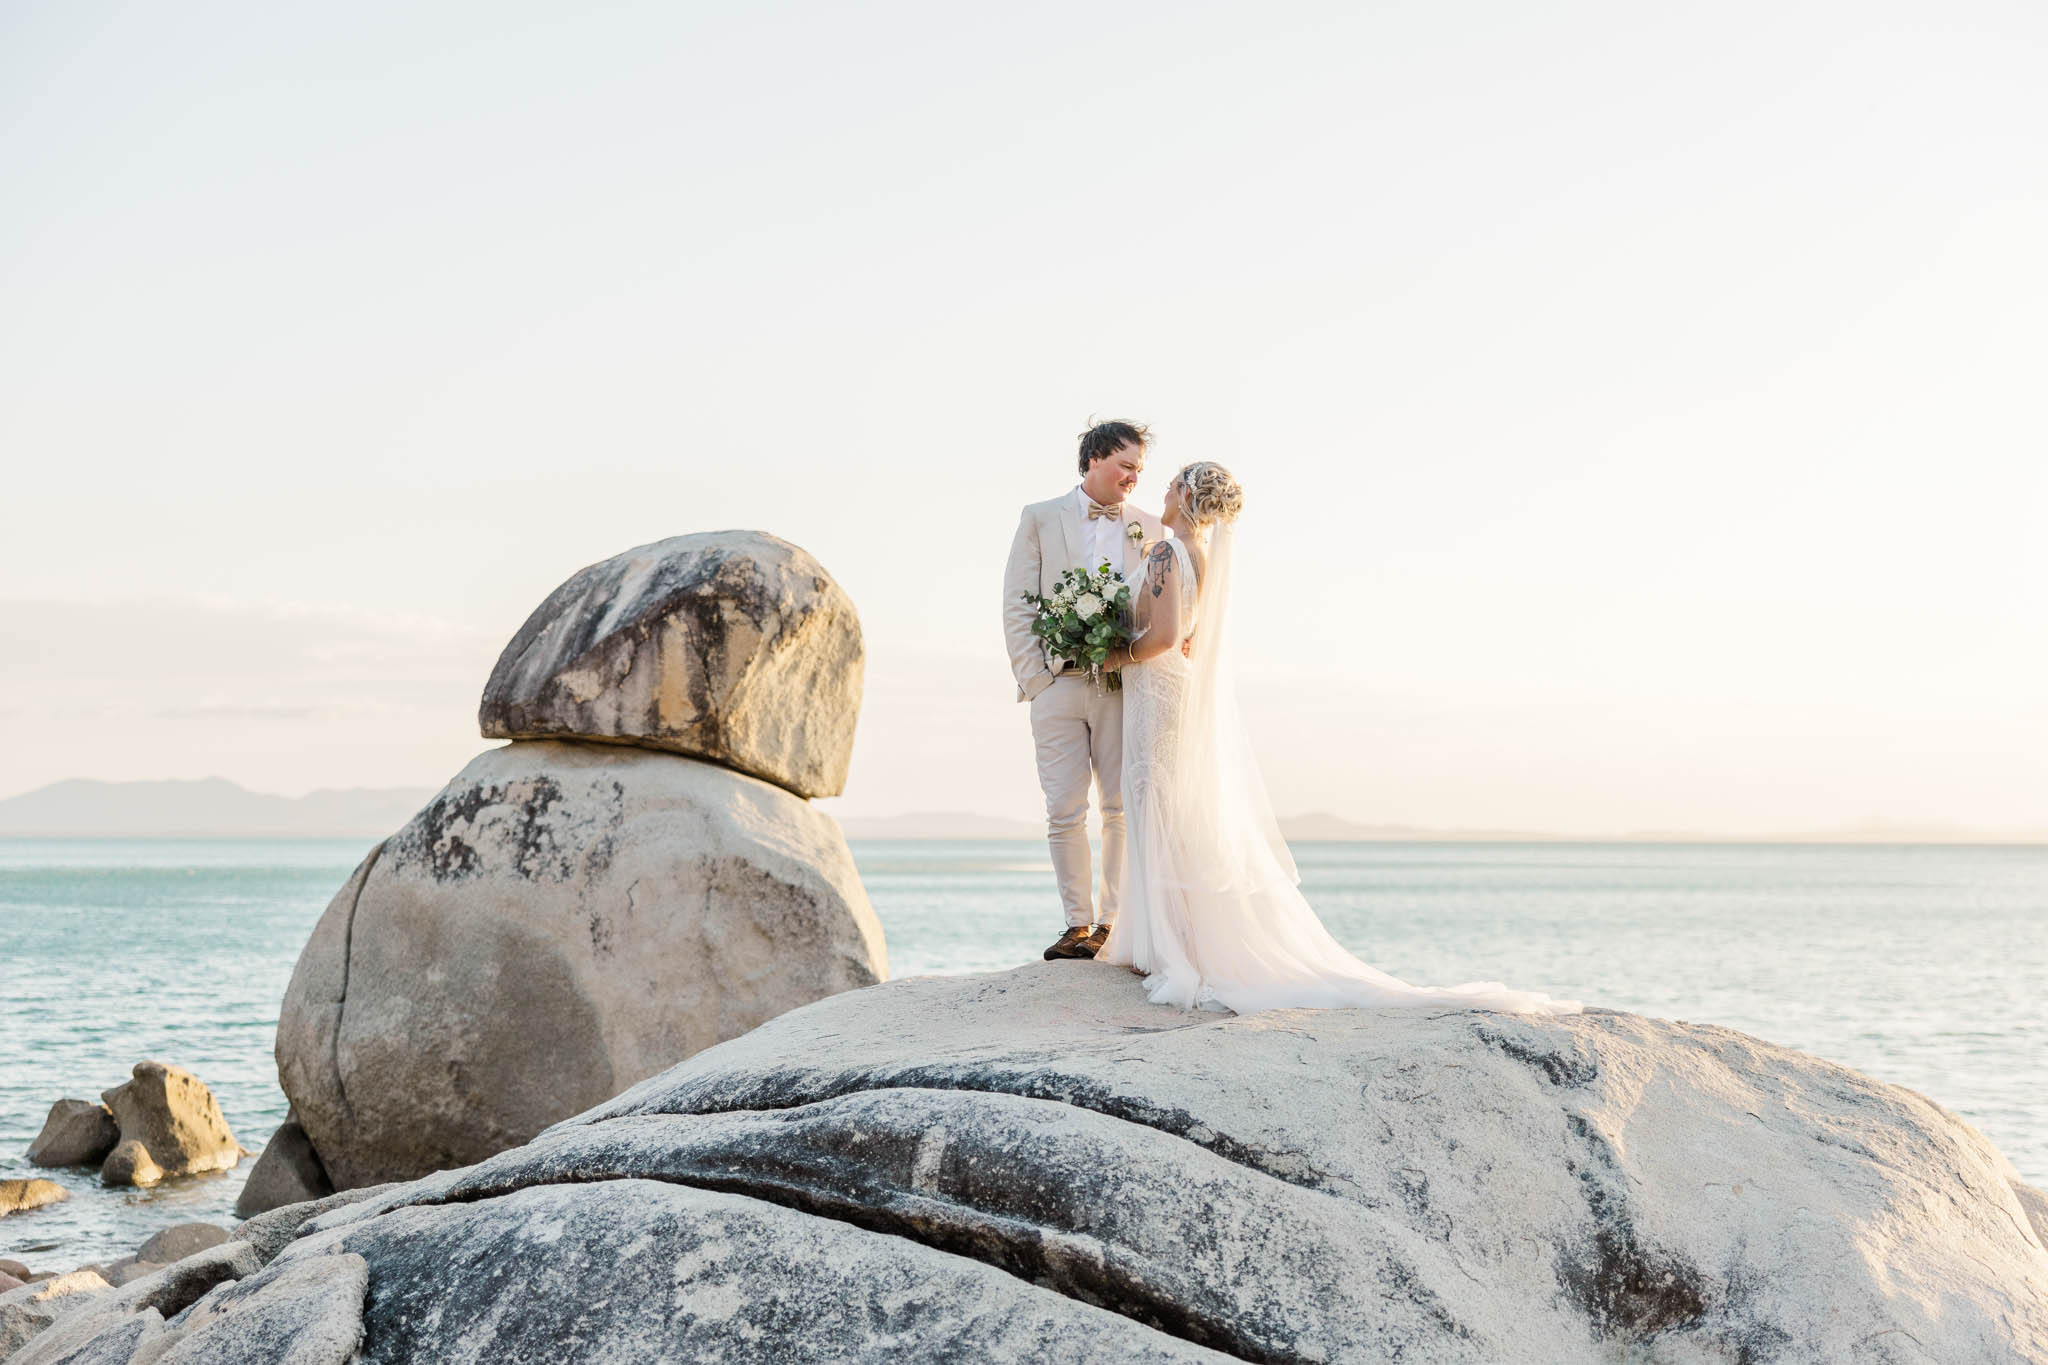 Bride and groom standing on large boulders in front of whitsunday waters during sunset portraits.